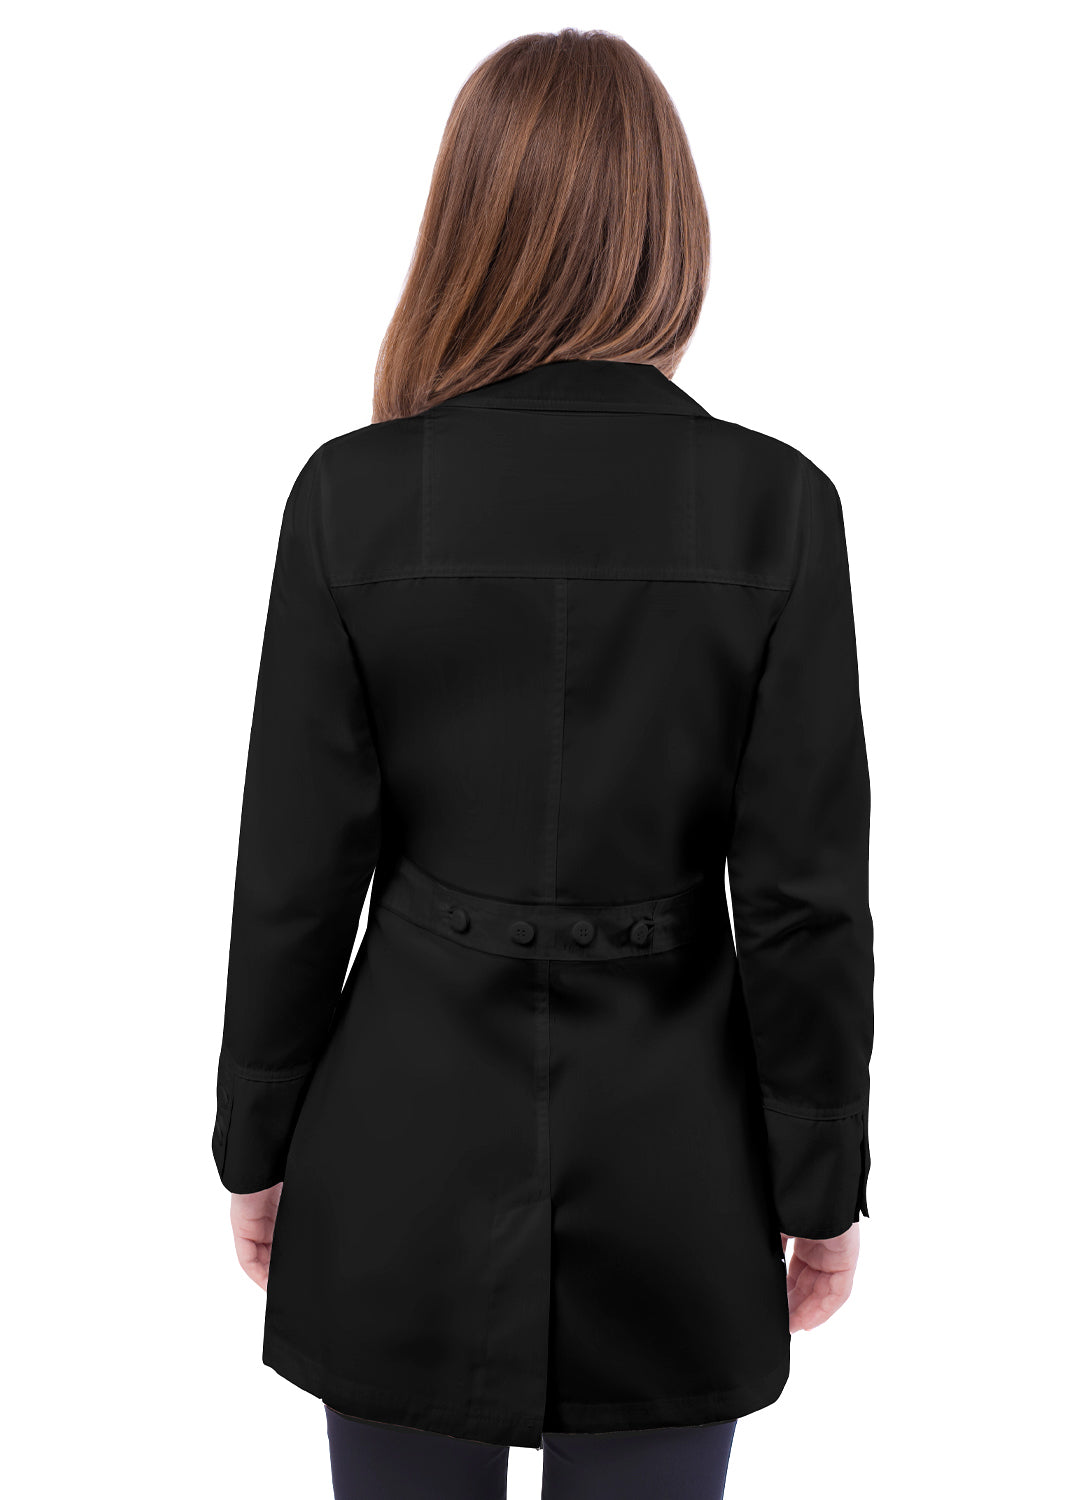 Adar Women's Black Flawless Front Large Pockets Lab Coat with buttoned Back midriff View Beyond Medwear Apparel